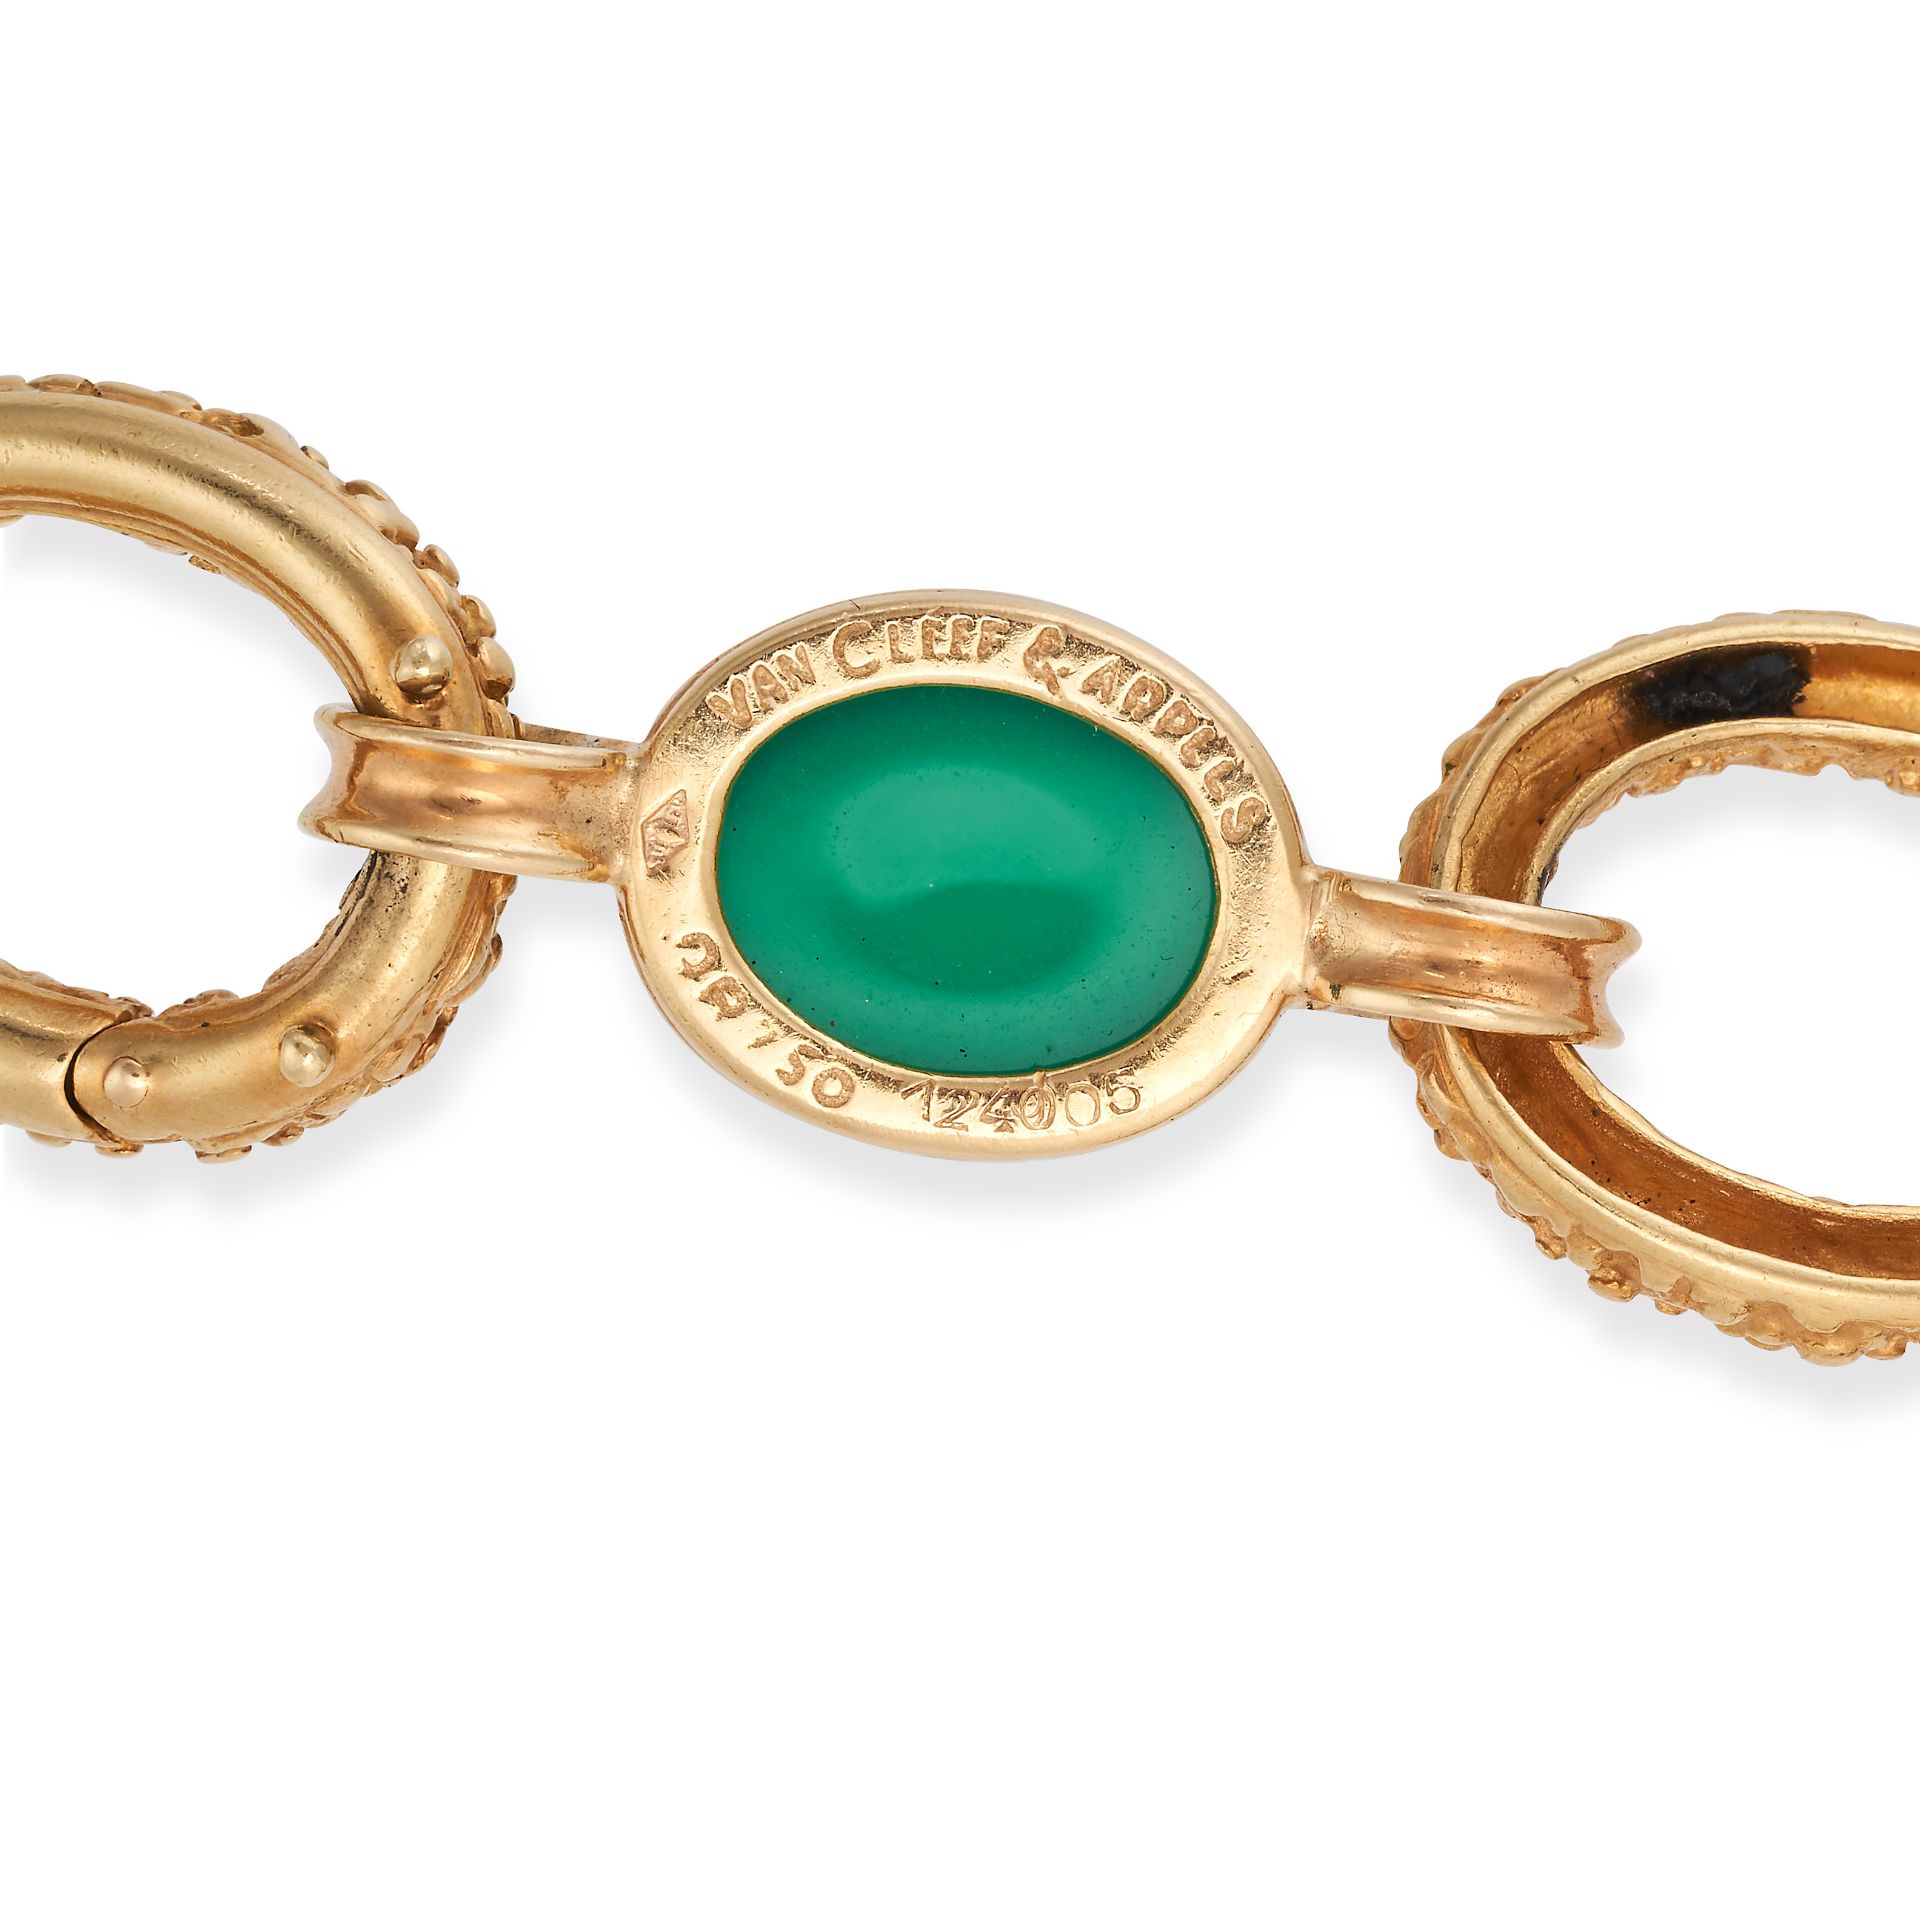 VAN CLEEF & ARPELS, A COLLECTION OF FRENCH CORAL AND CHRYSOPRASE VAN CLEEF & ARPELS JEWELLERY in ... - Bild 3 aus 8